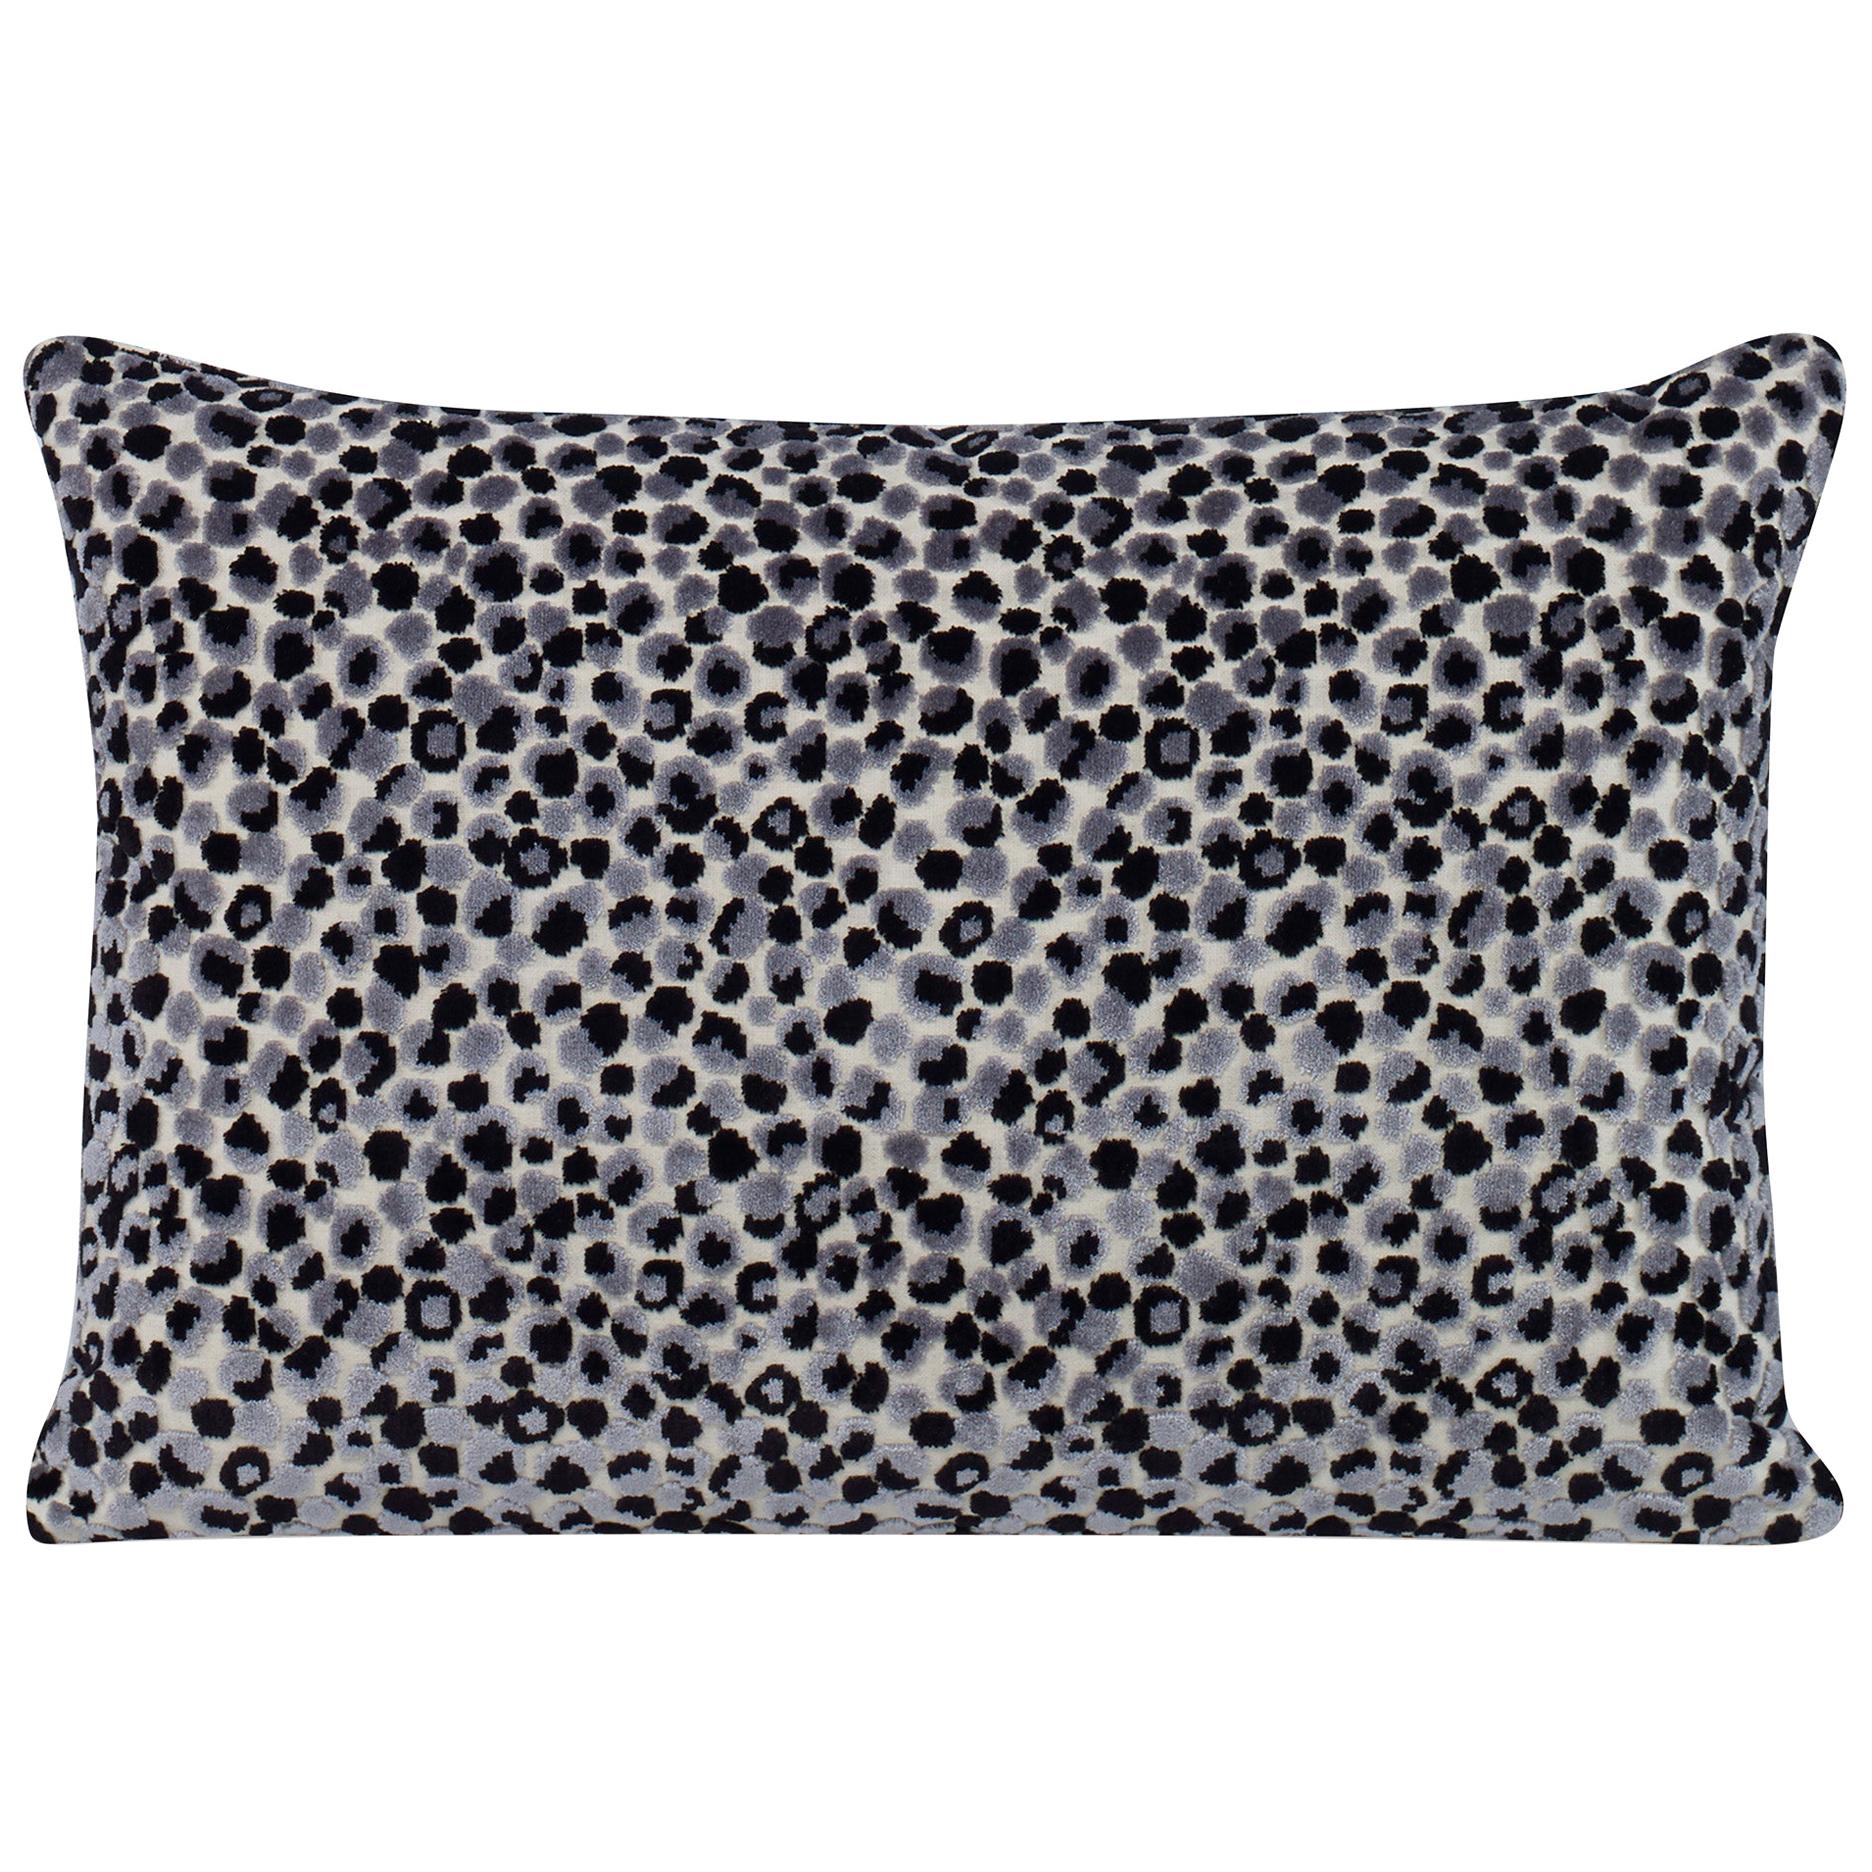 Circulate Pillow in Black and Gray by Curatedkravet